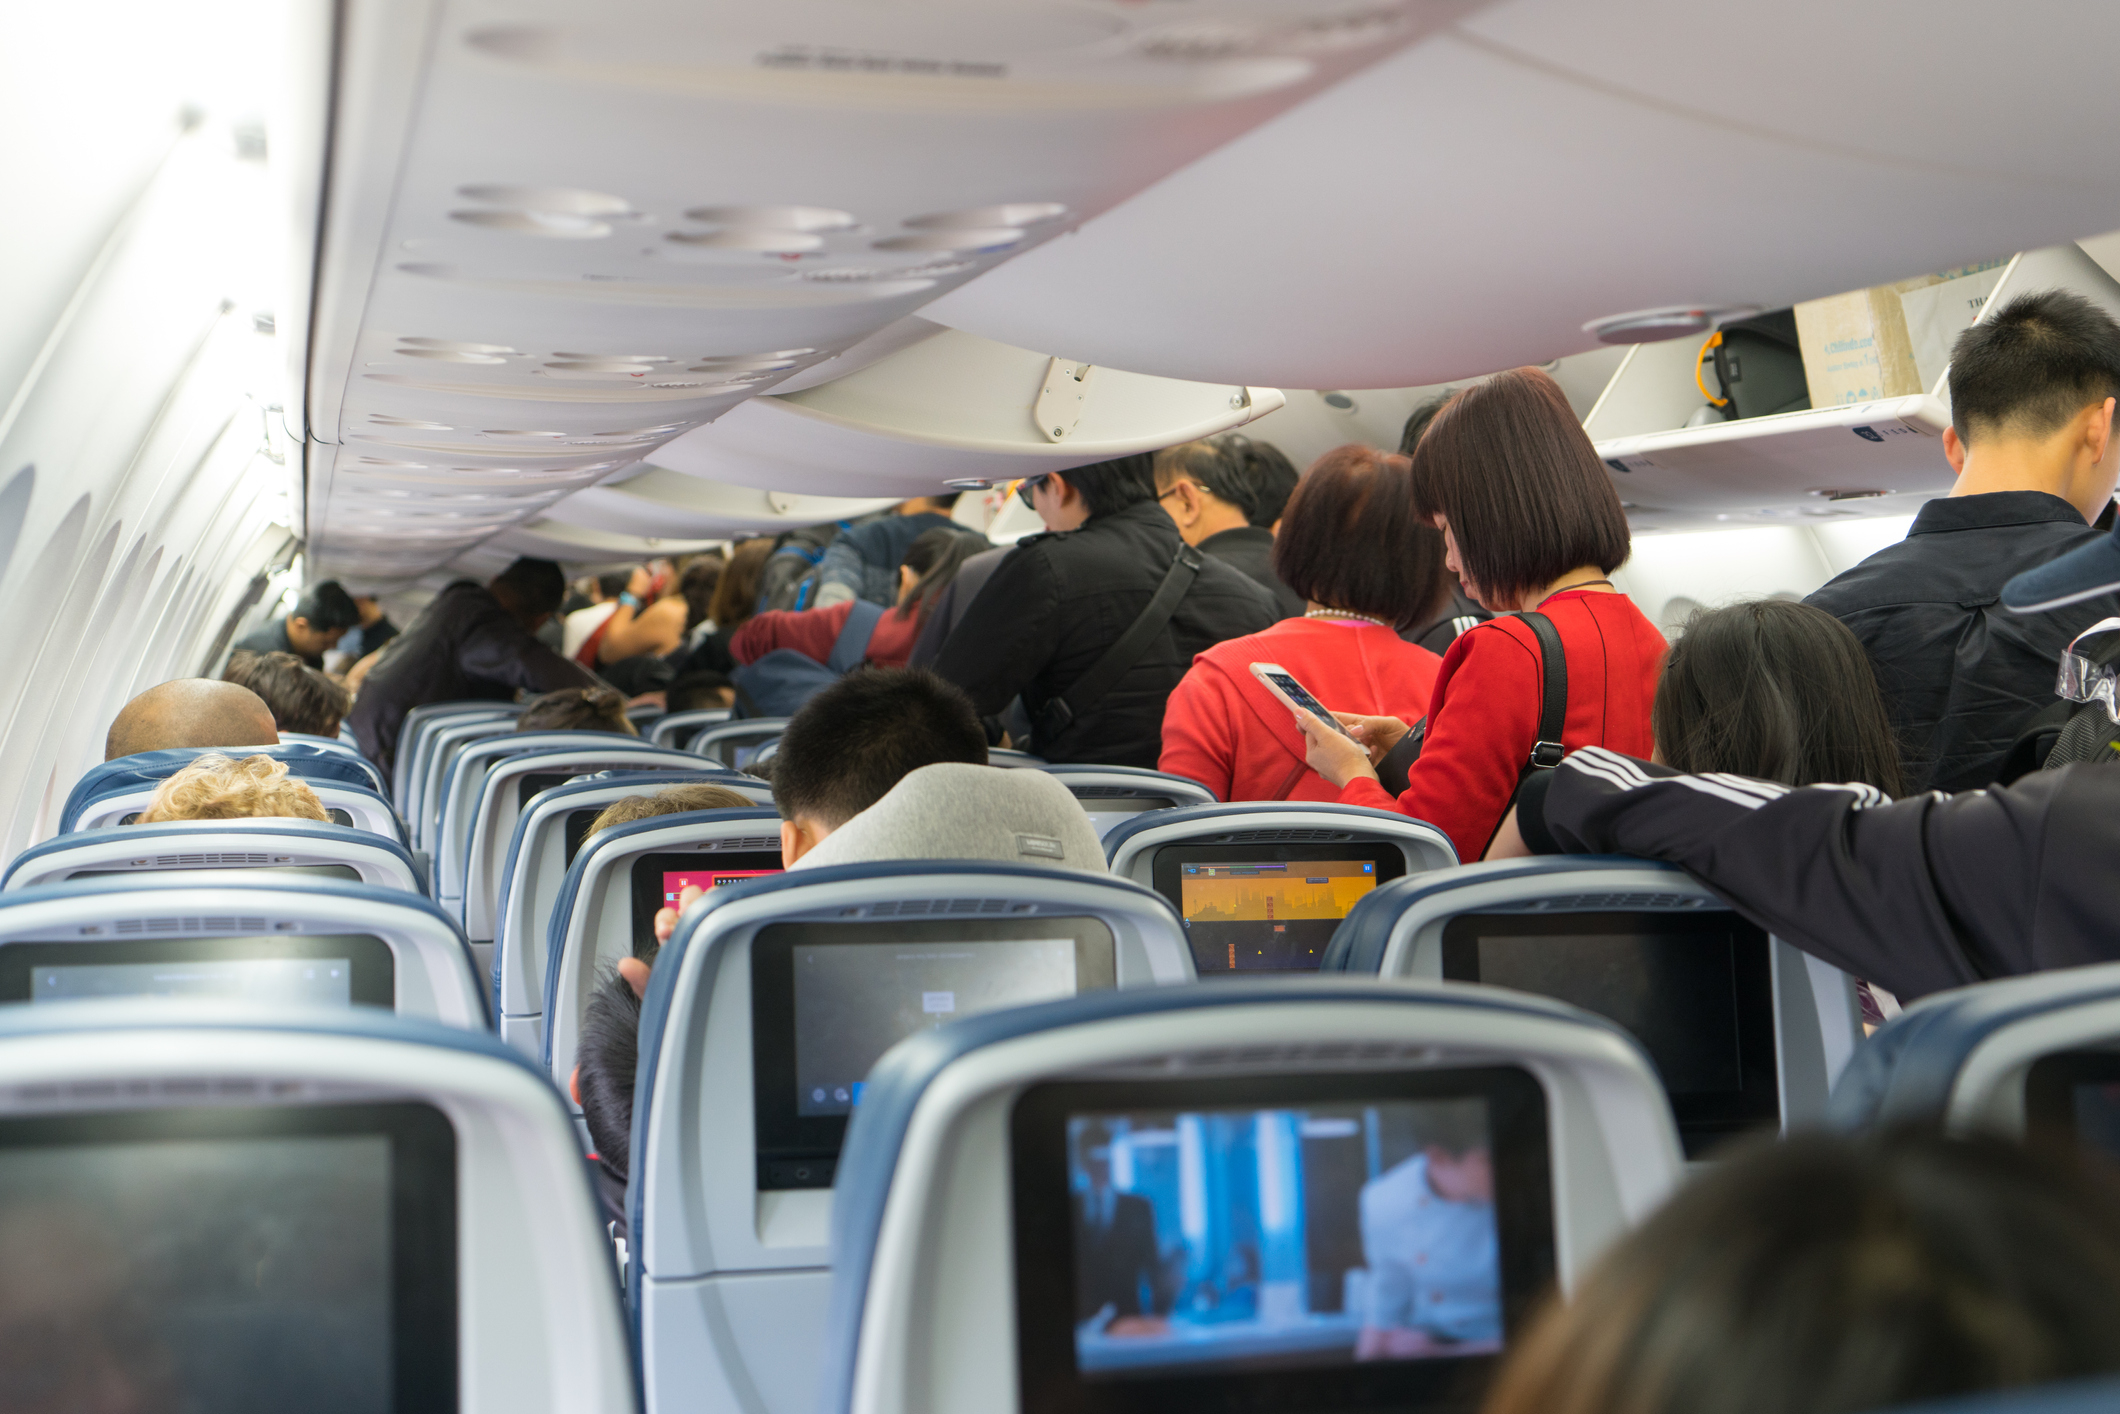 People standing in an airplane aisle cabin before disembarking